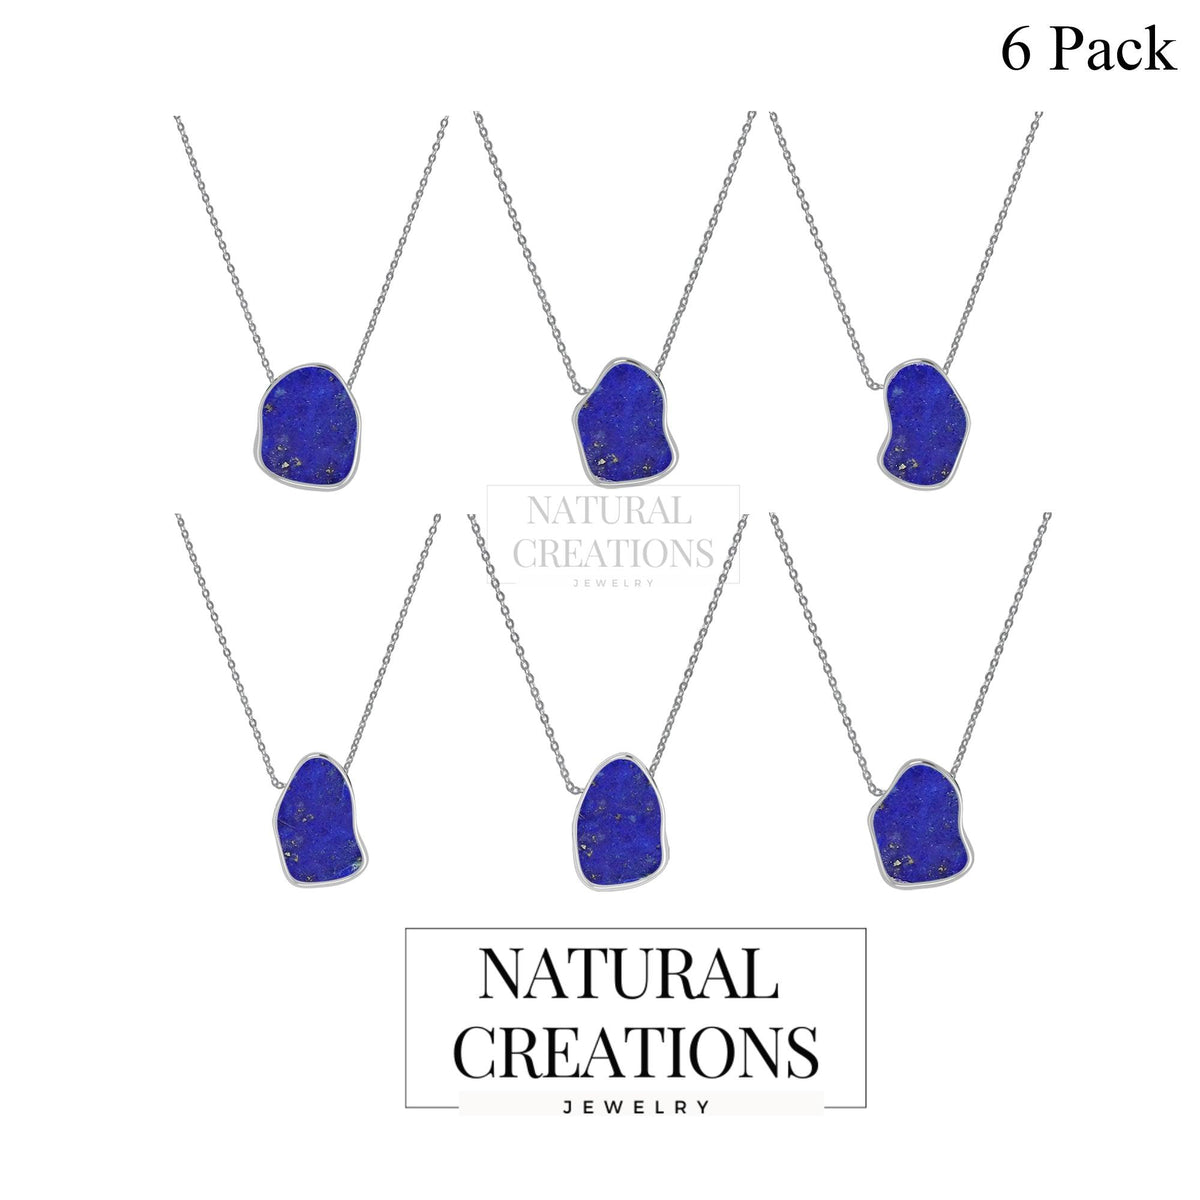 925 Sterling Silver Rough Lapis Slider Necklace With Chain 18" Bezel Set Jewelry Pack of 6